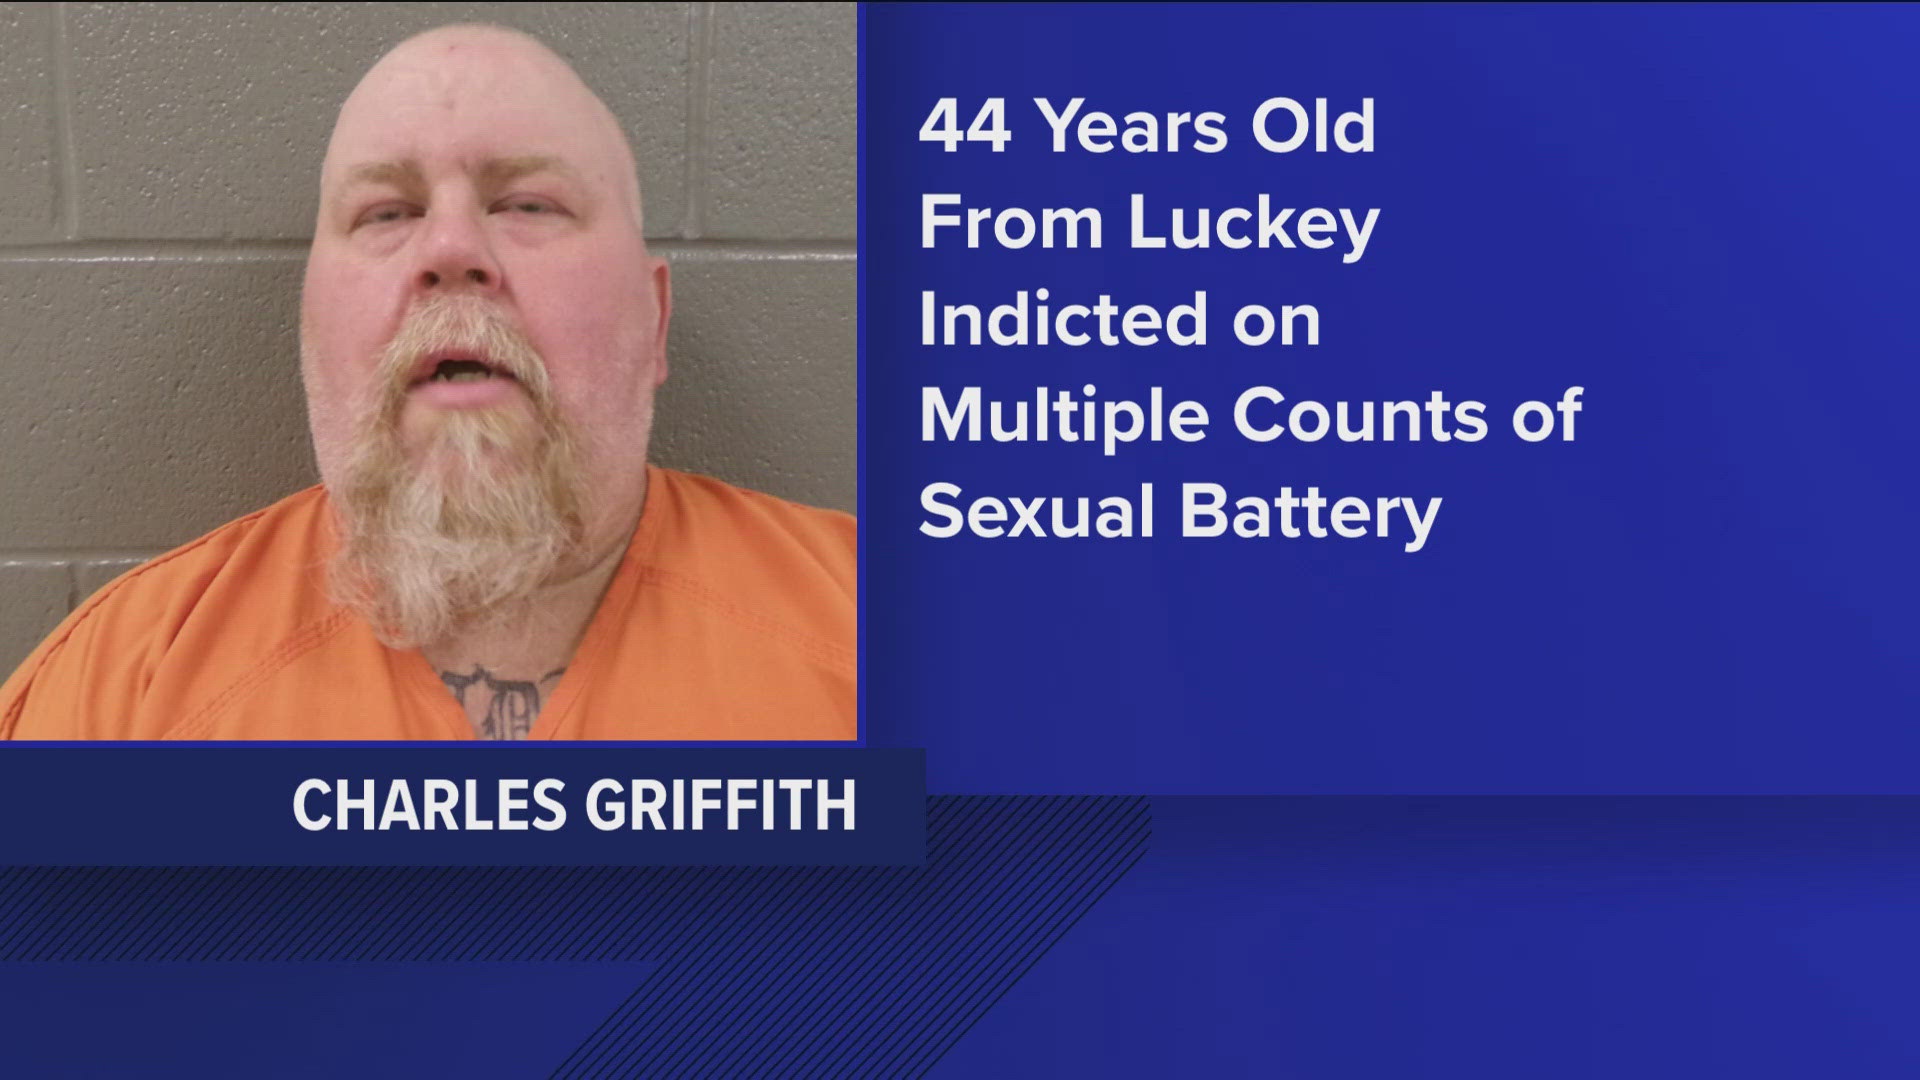 Charles Griffith, 44, was indicted on 10 counts of sexual battery and one count of disseminating matter harmful to juveniles.